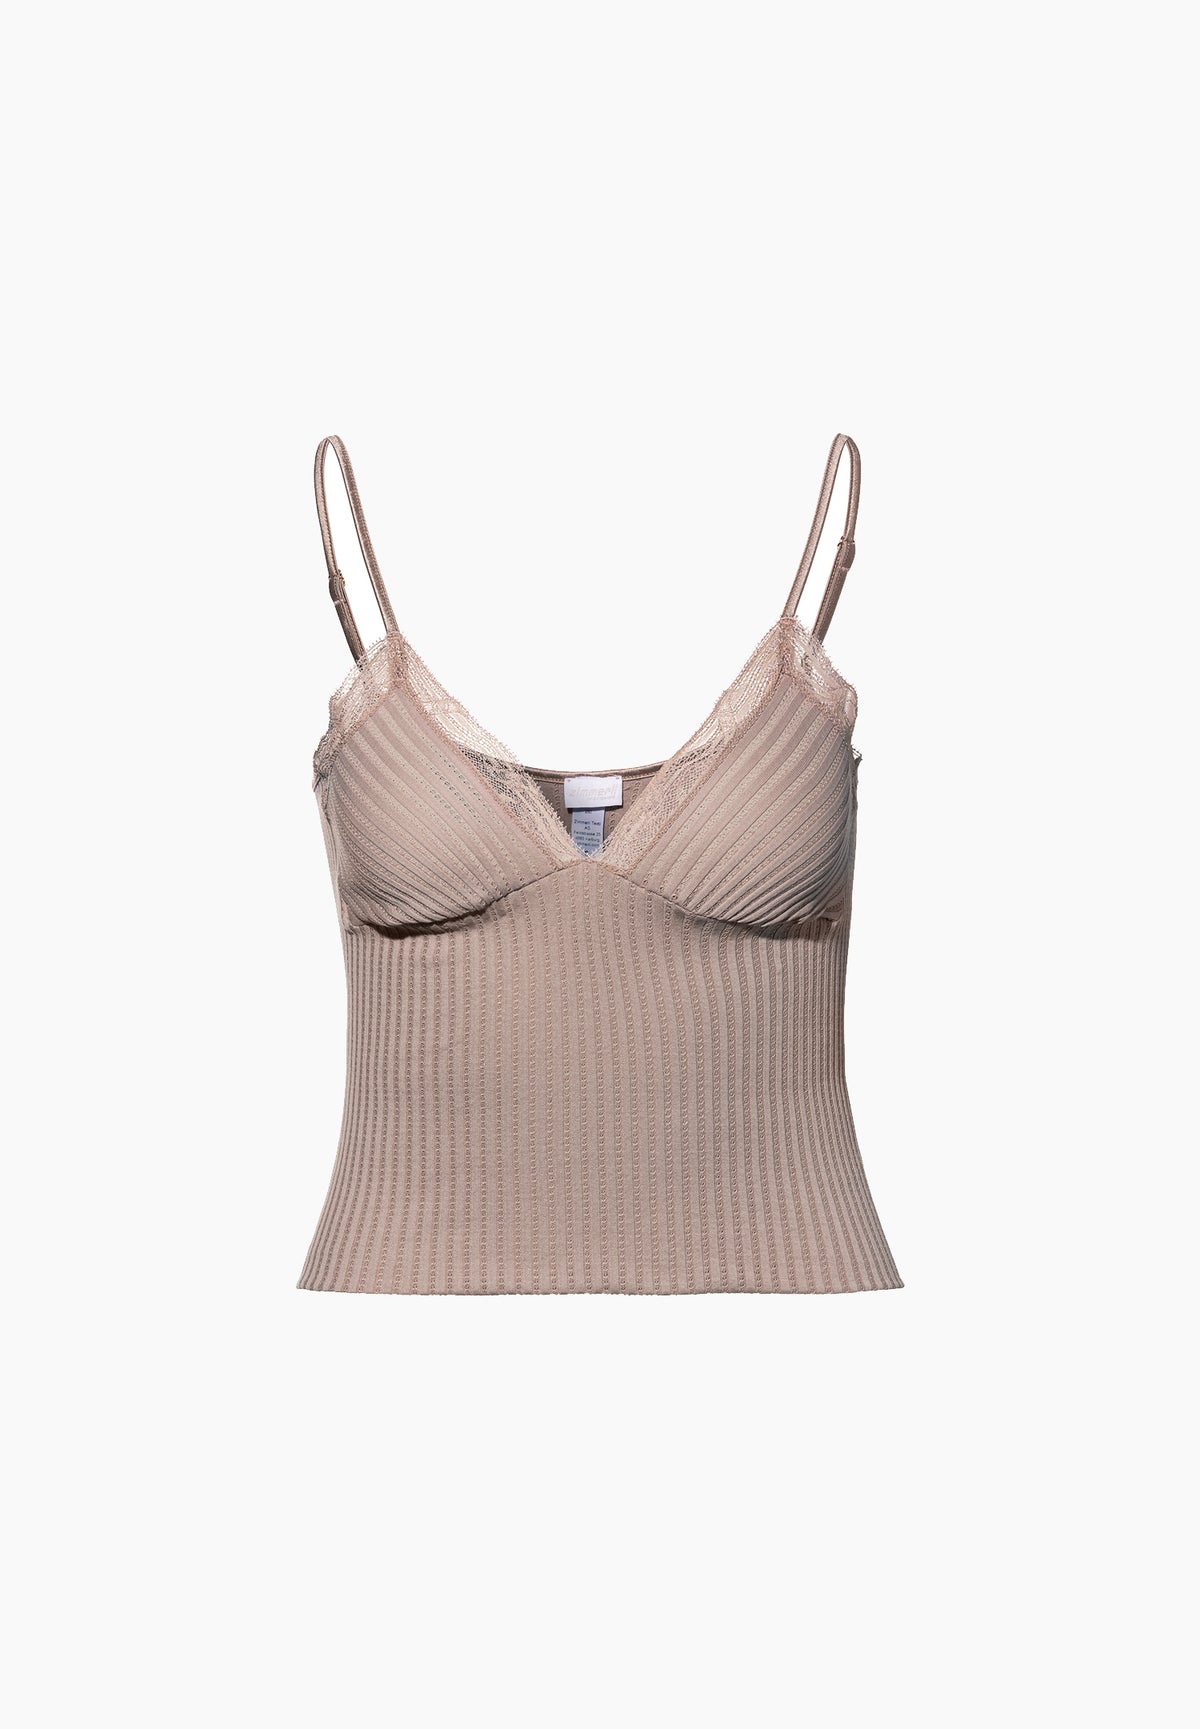 Maude Privé | Cropped Top - pink taupe